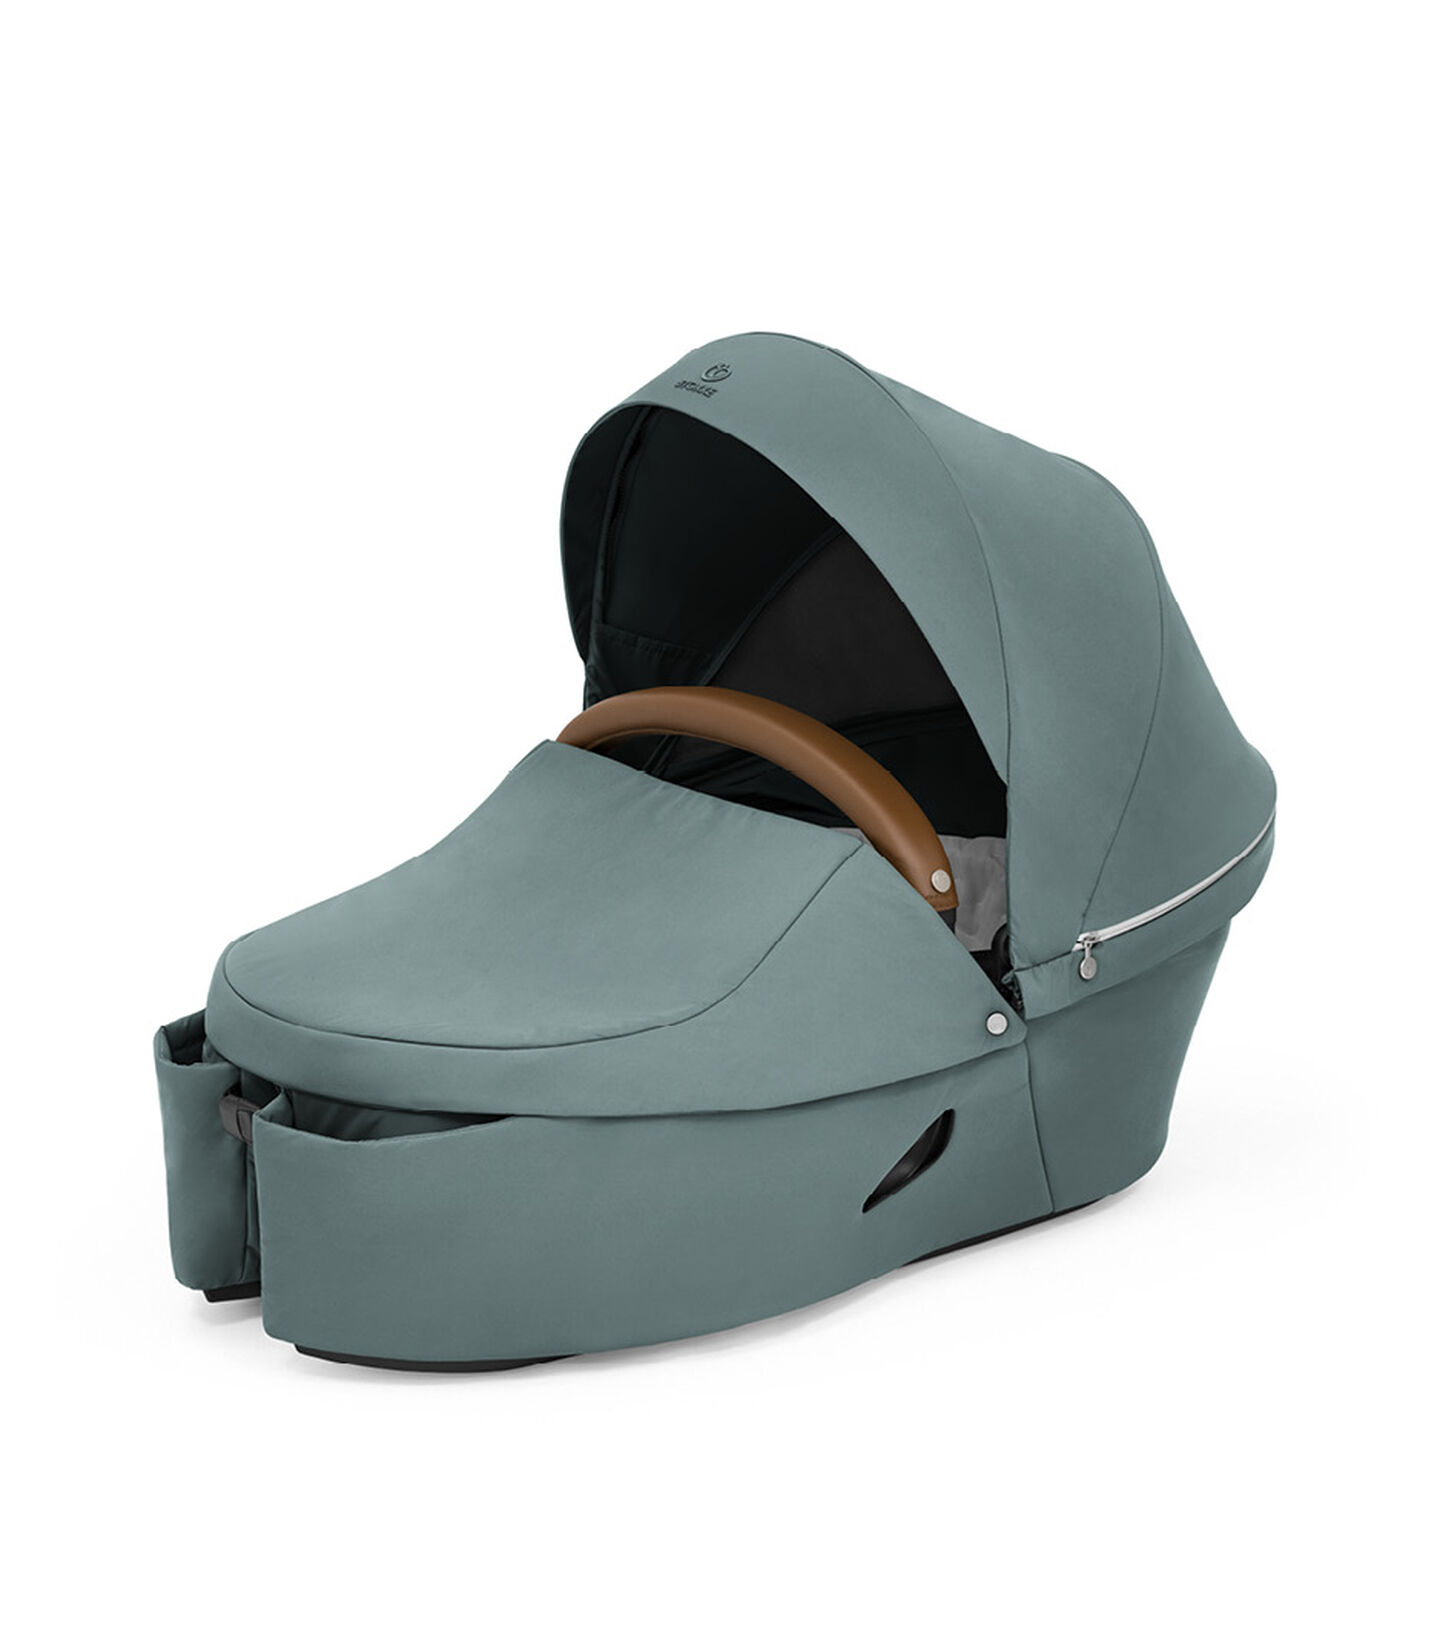 Stokke® Xplory® X reiswieg Cool Teal, Cool Teal, mainview view 5